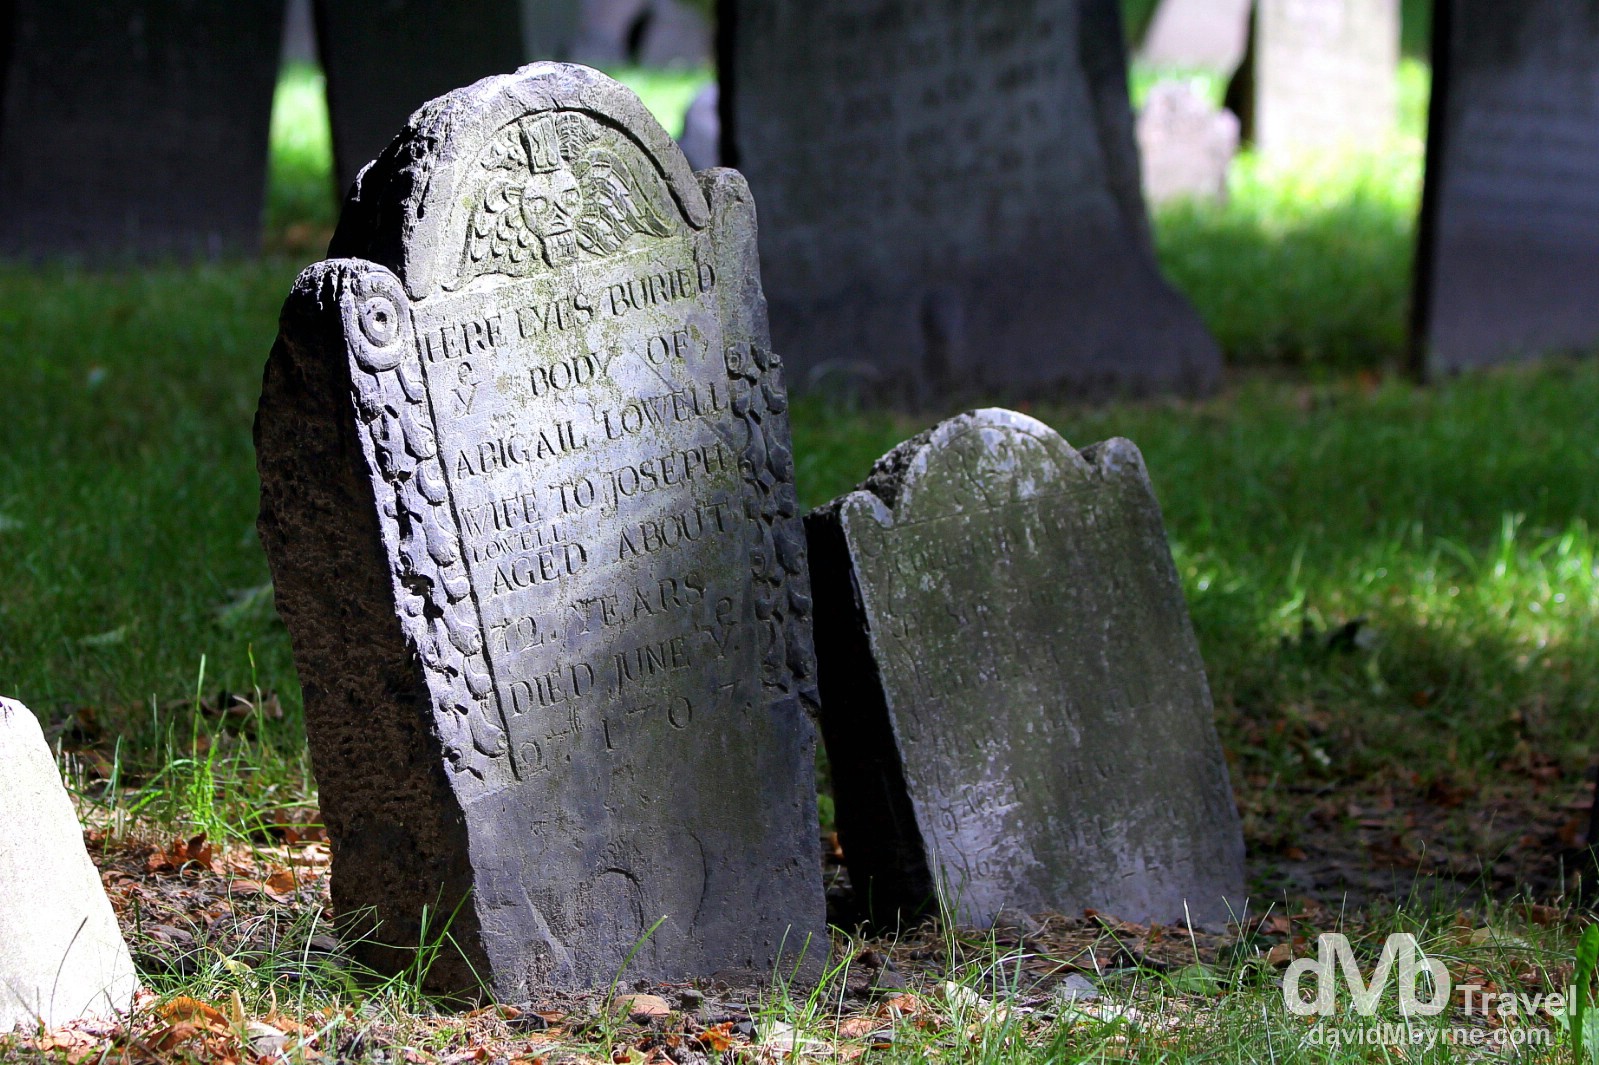 Gravestones in Granary Burying Ground, Tremont Street, Boston. So named because of its proximity to Boston’s first granary, the 1660, 2-acre cemetery is one of the oldest historic sites in the city, yet ‘only’ the third oldest burying ground in Boston - this place is ye olde indeed. It contains 2,345 gravestones and 204 tombs and is the final resting place for may a prominent Bostonian & revolutionary, including John Hancock & Samuel Adams, signers of the American Declaration of Independence. Granary Burying Ground, Tremont Street, Boston, Massachusetts, USA. July 15th 2013.